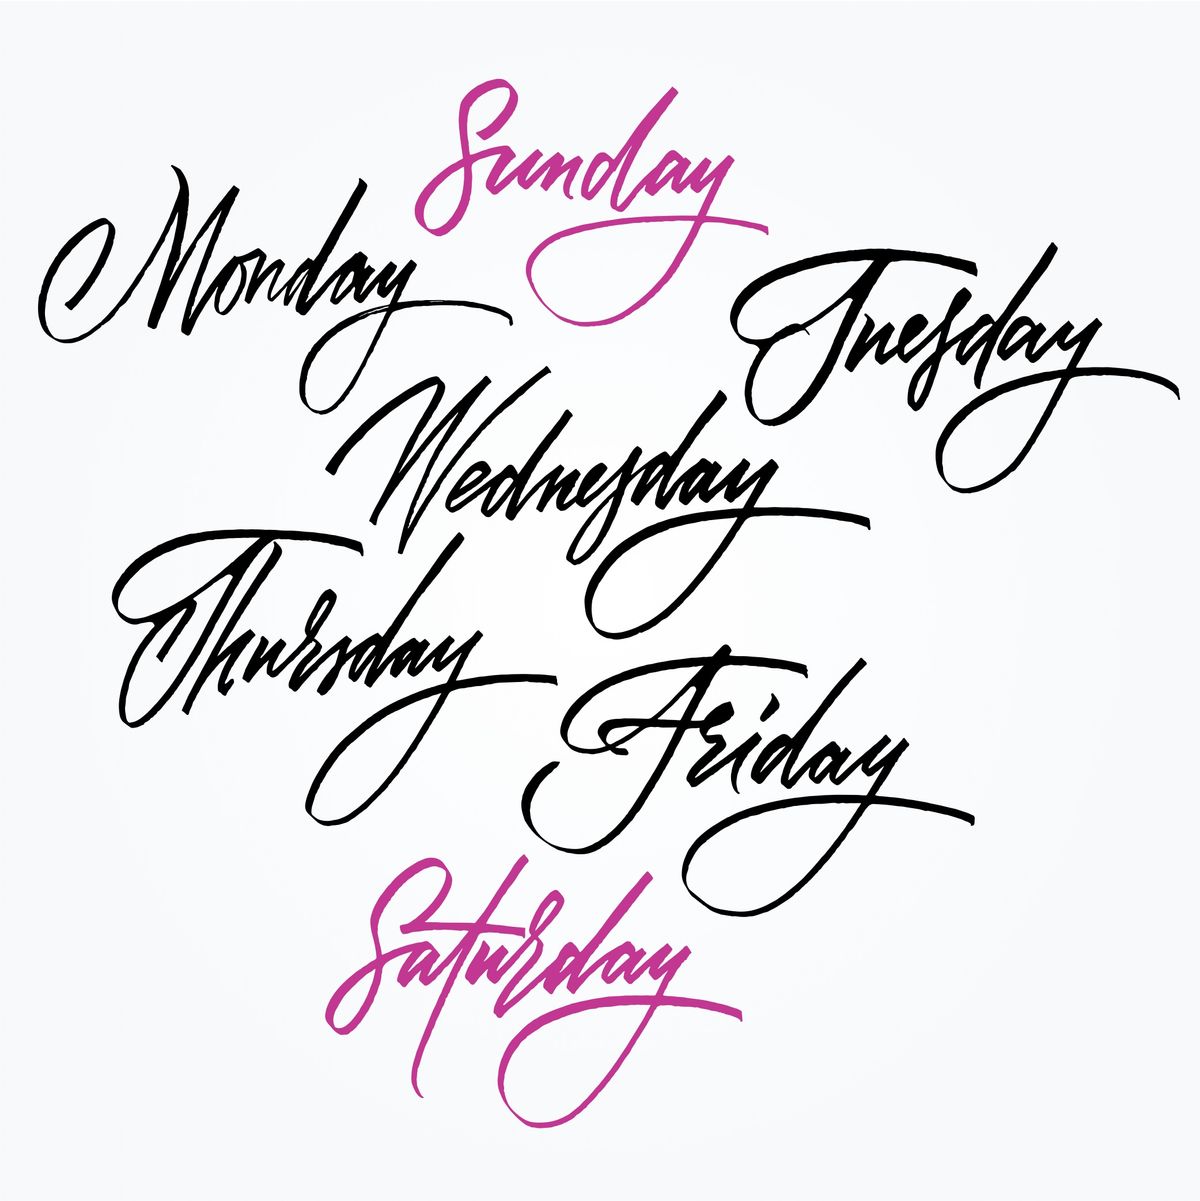 The days of the week. Sunday Monday days of the week song…, by Huma waqas